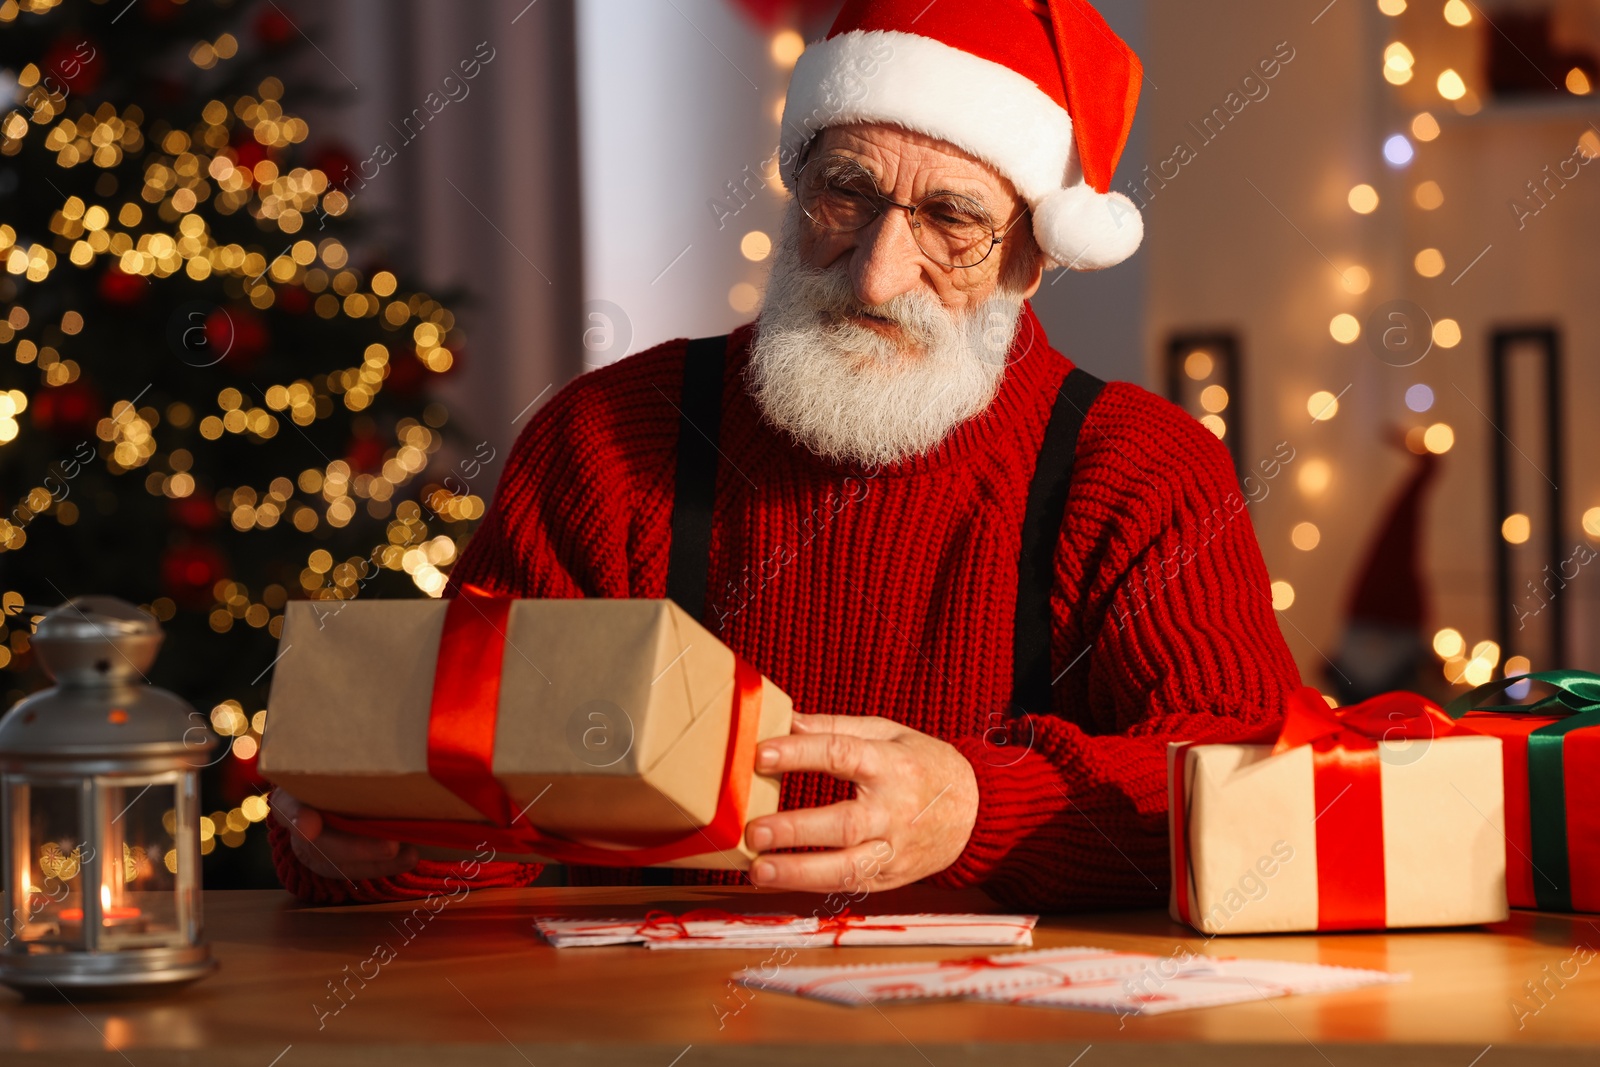 Photo of Santa Claus holding gift box at his workplace in room decorated for Christmas